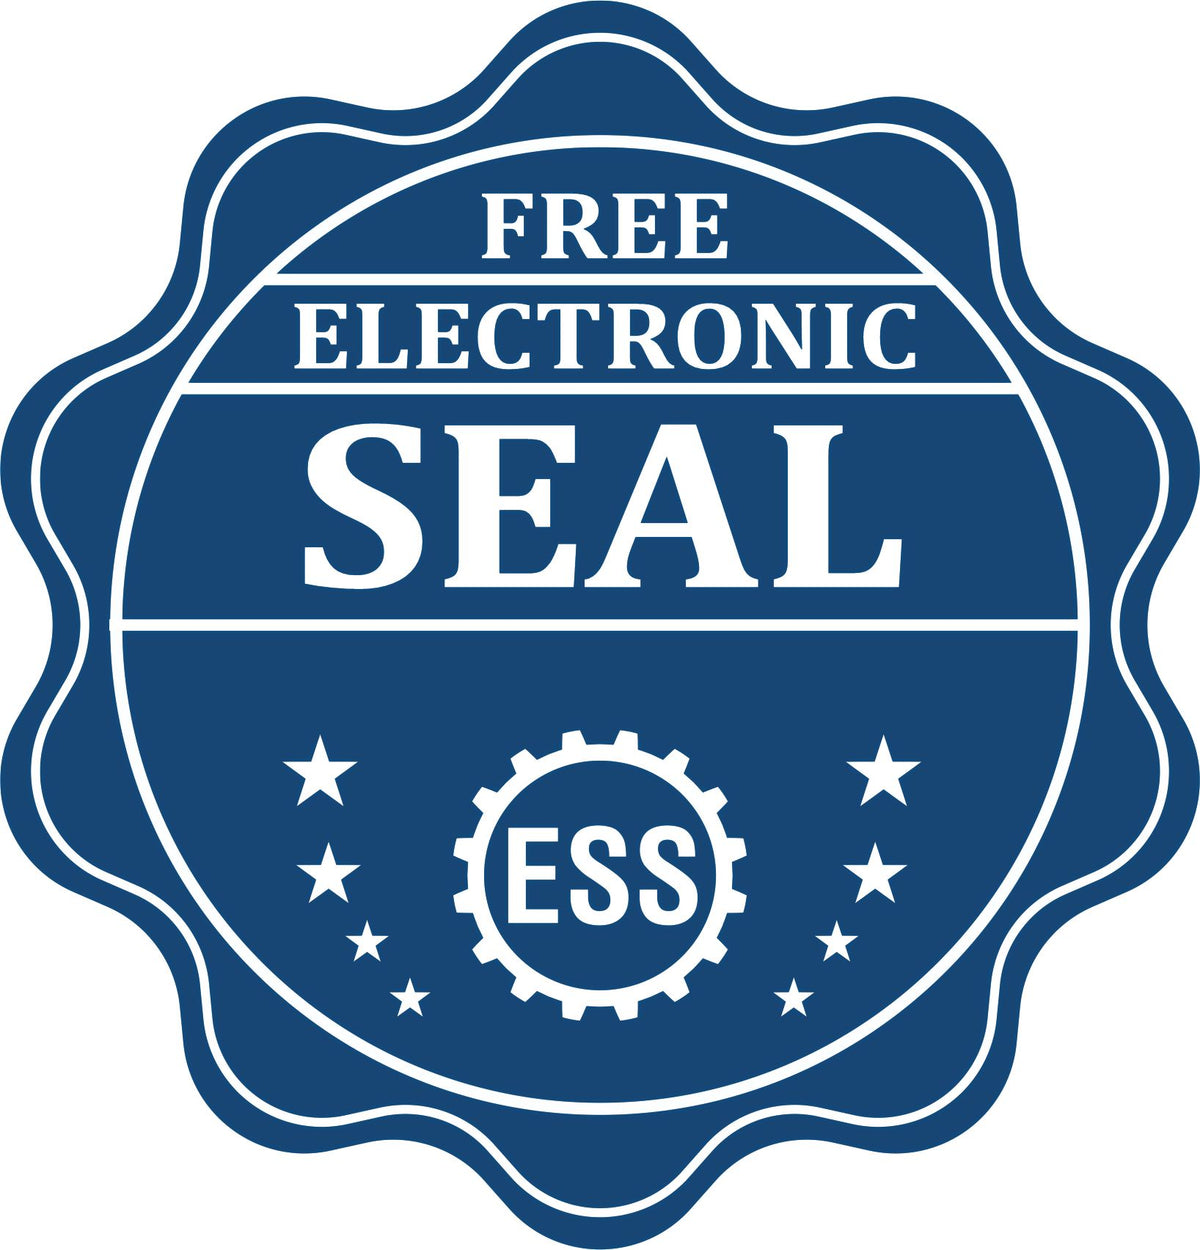 A badge showing a free electronic seal for the Premium MaxLight Pre-Inked Missouri Geology Stamp with stars and the ESS gear on the emblem.